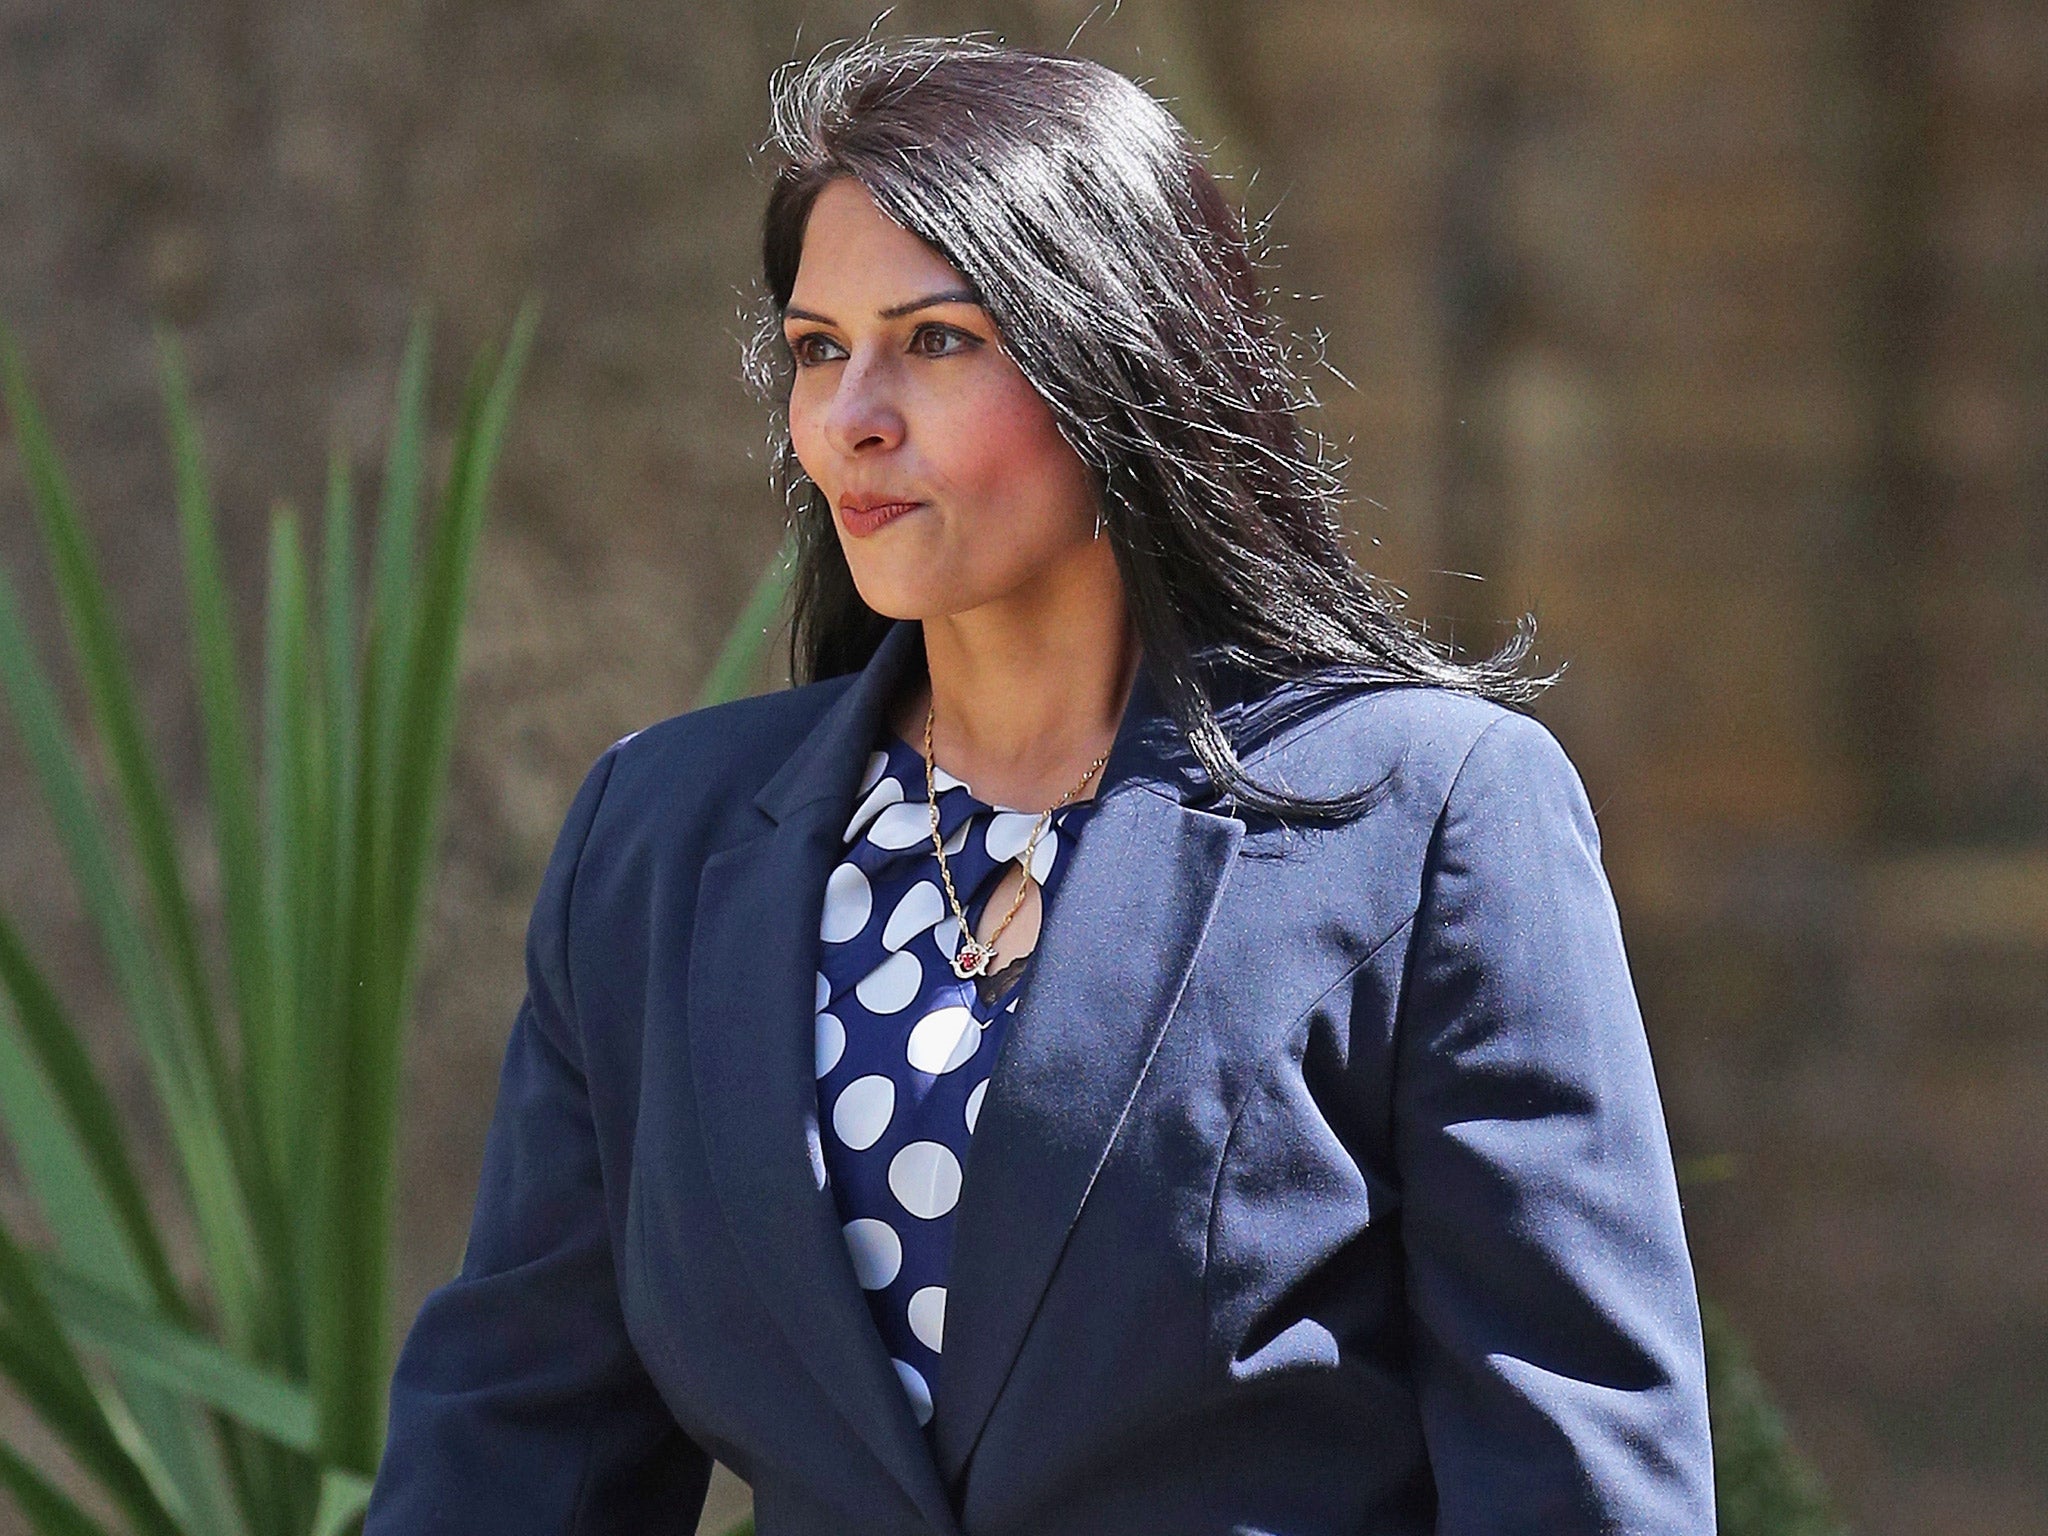 Priti Patel has been appointed as a DWP minister